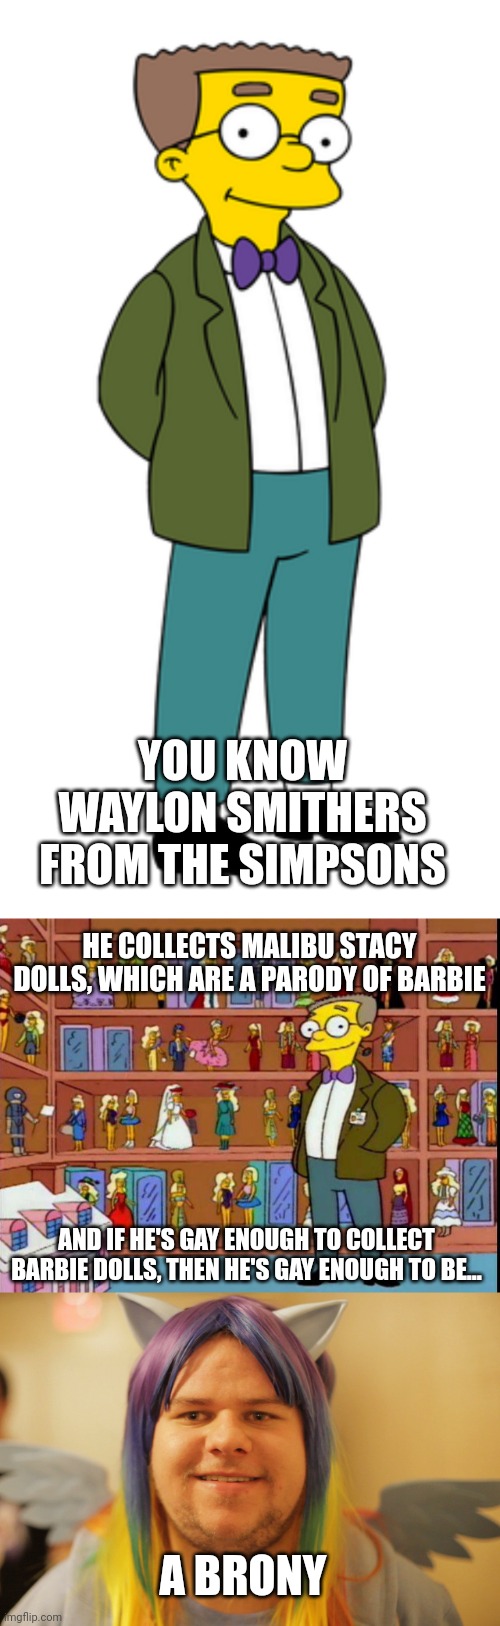 Waylon Smithers on The Simpsons is so likely to be a brony | YOU KNOW WAYLON SMITHERS FROM THE SIMPSONS; HE COLLECTS MALIBU STACY DOLLS, WHICH ARE A PARODY OF BARBIE; AND IF HE'S GAY ENOUGH TO COLLECT BARBIE DOLLS, THEN HE'S GAY ENOUGH TO BE... A BRONY | image tagged in the simpsons,my little pony,brony,gay | made w/ Imgflip meme maker